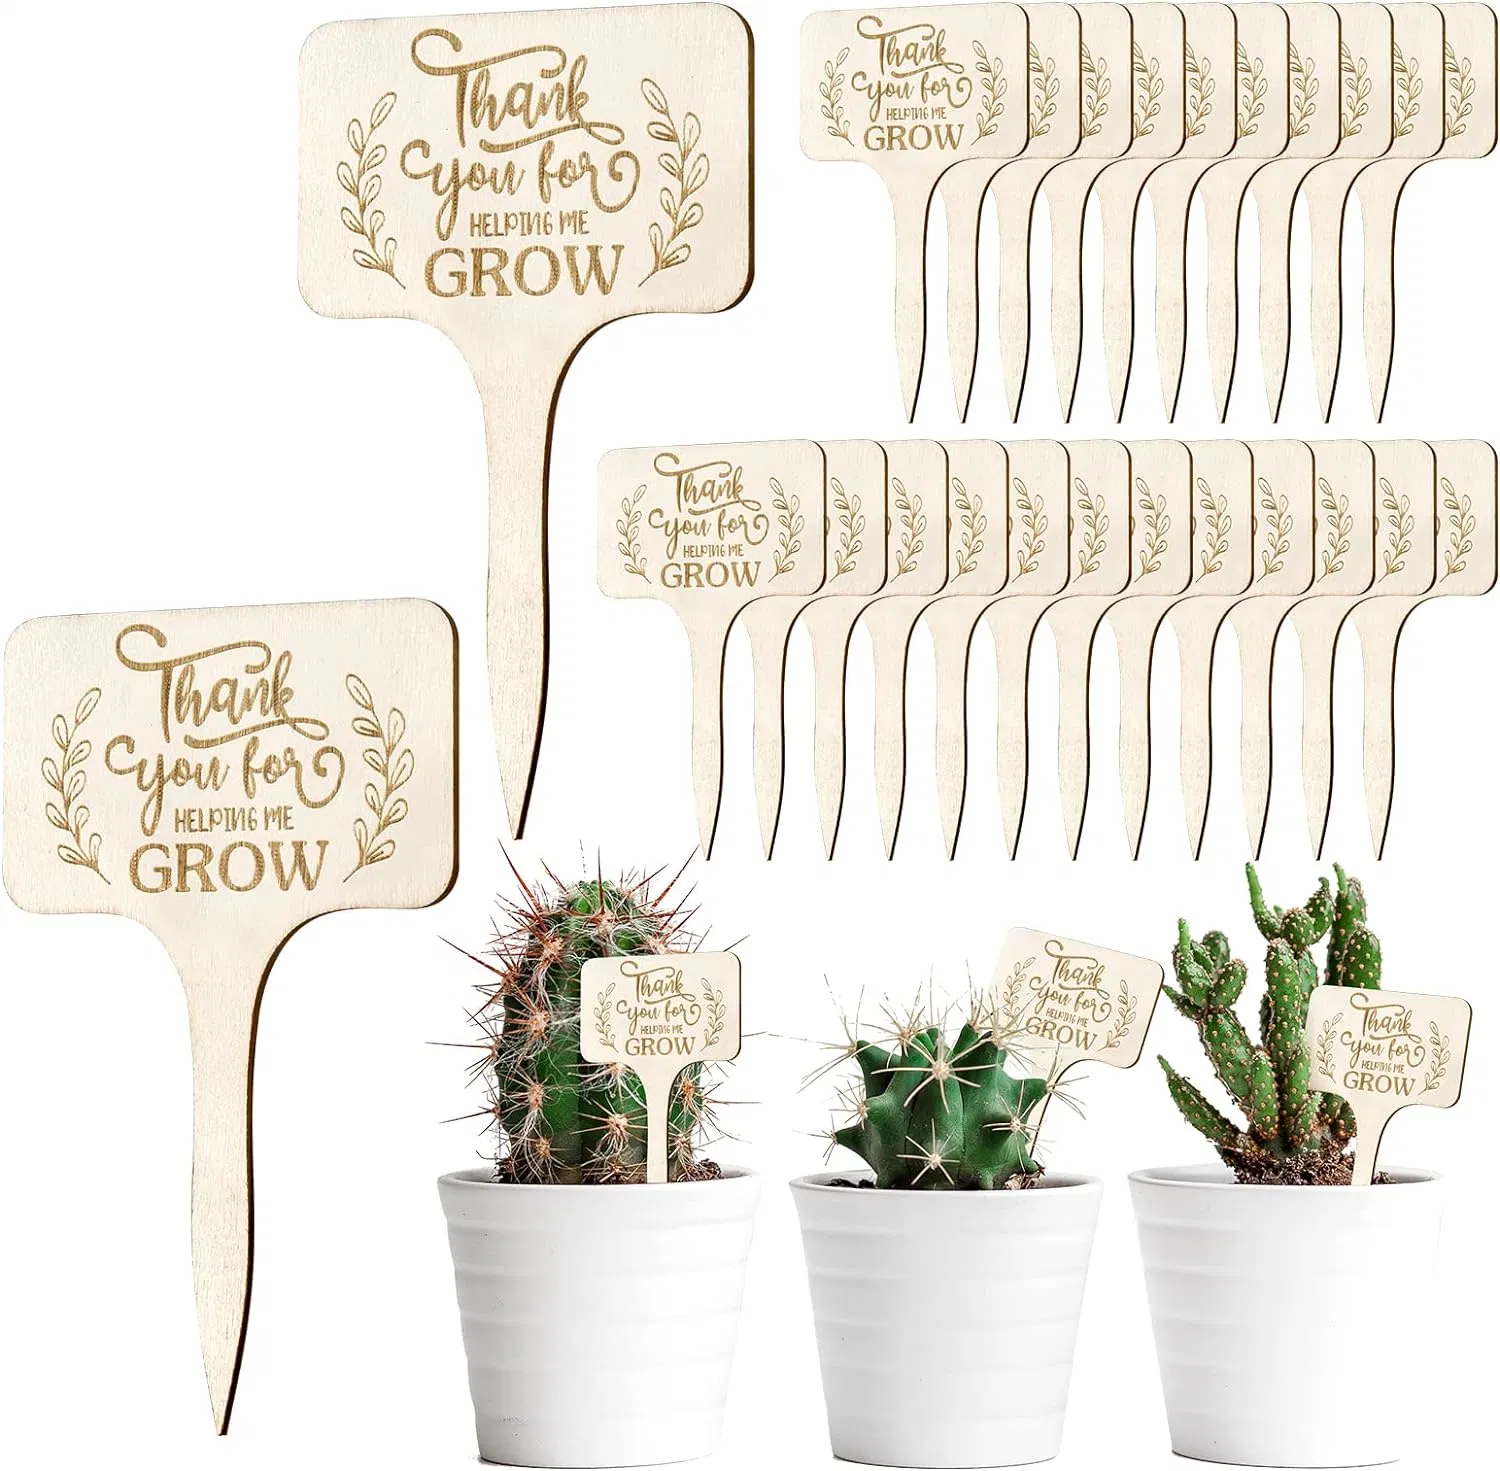 Wooden Plant Stakes 30PCS Marker Tags Decorative Garden Supplies for Teacher Appreciation Gift Thanksgiving Baby Shower